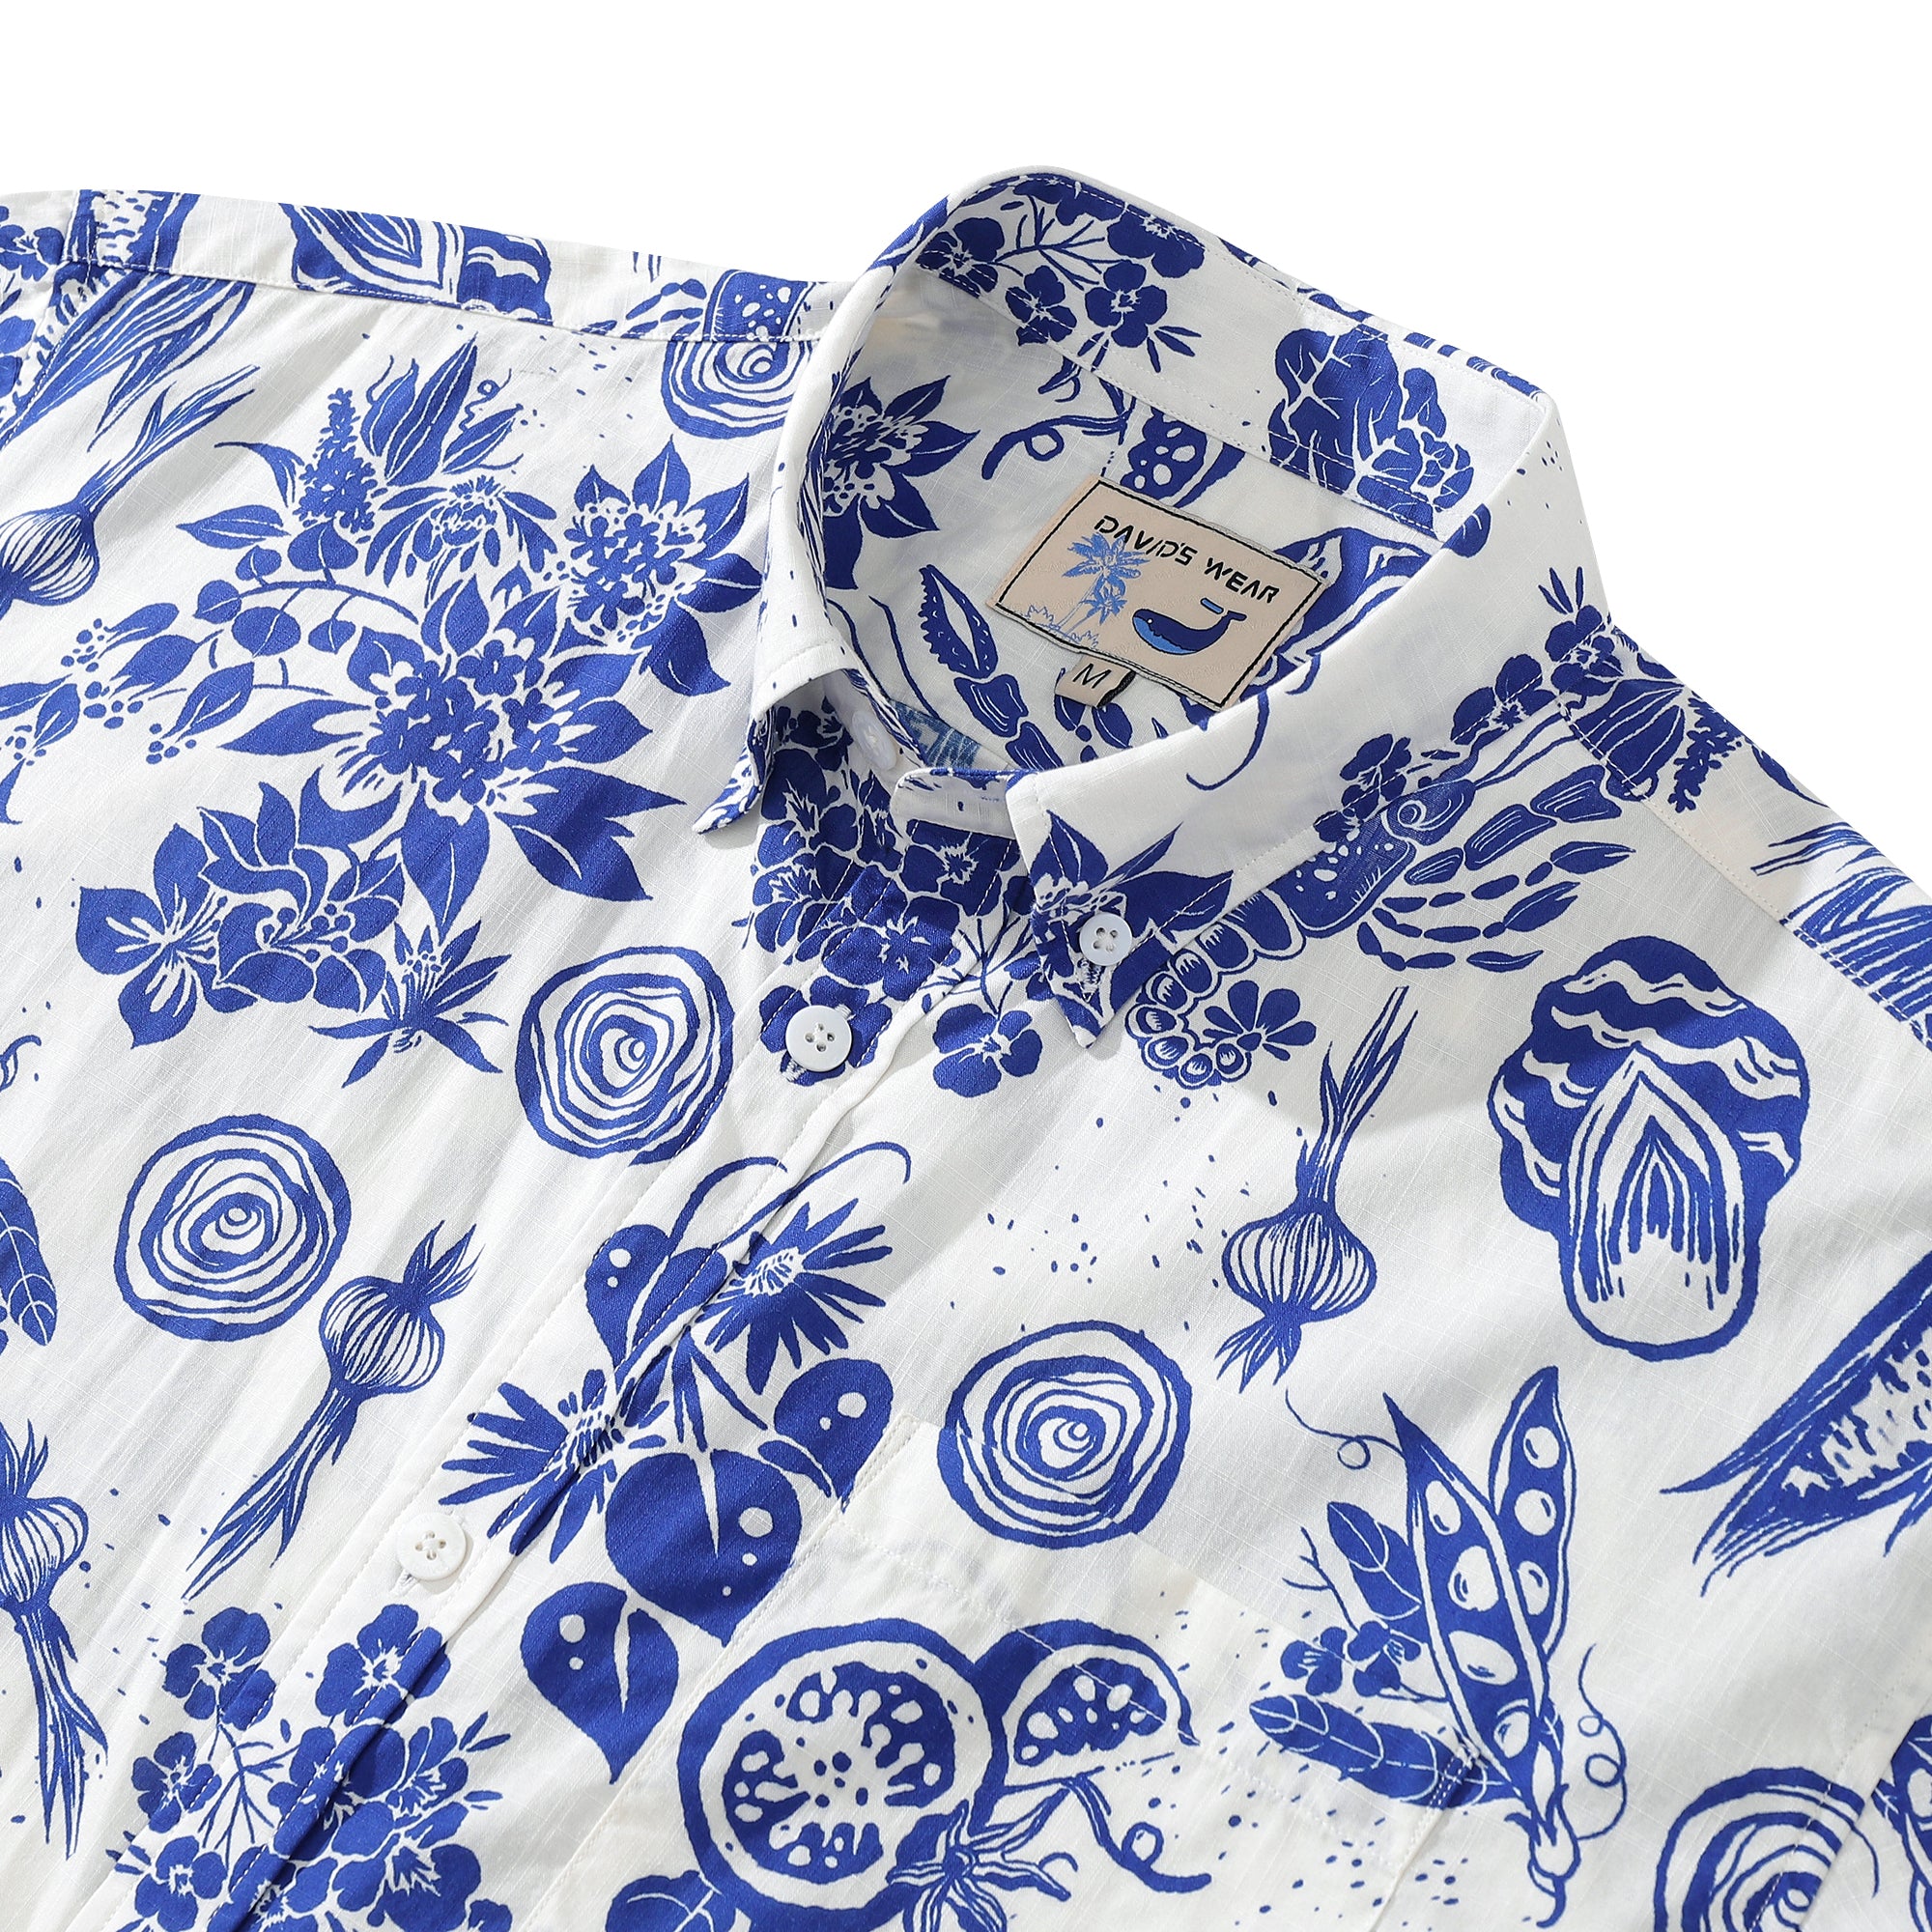 Hawaiian Shirt For Men Shrimp and Vegetable Blue and White Bicolor Print Short Sleeve Cotton Button Down